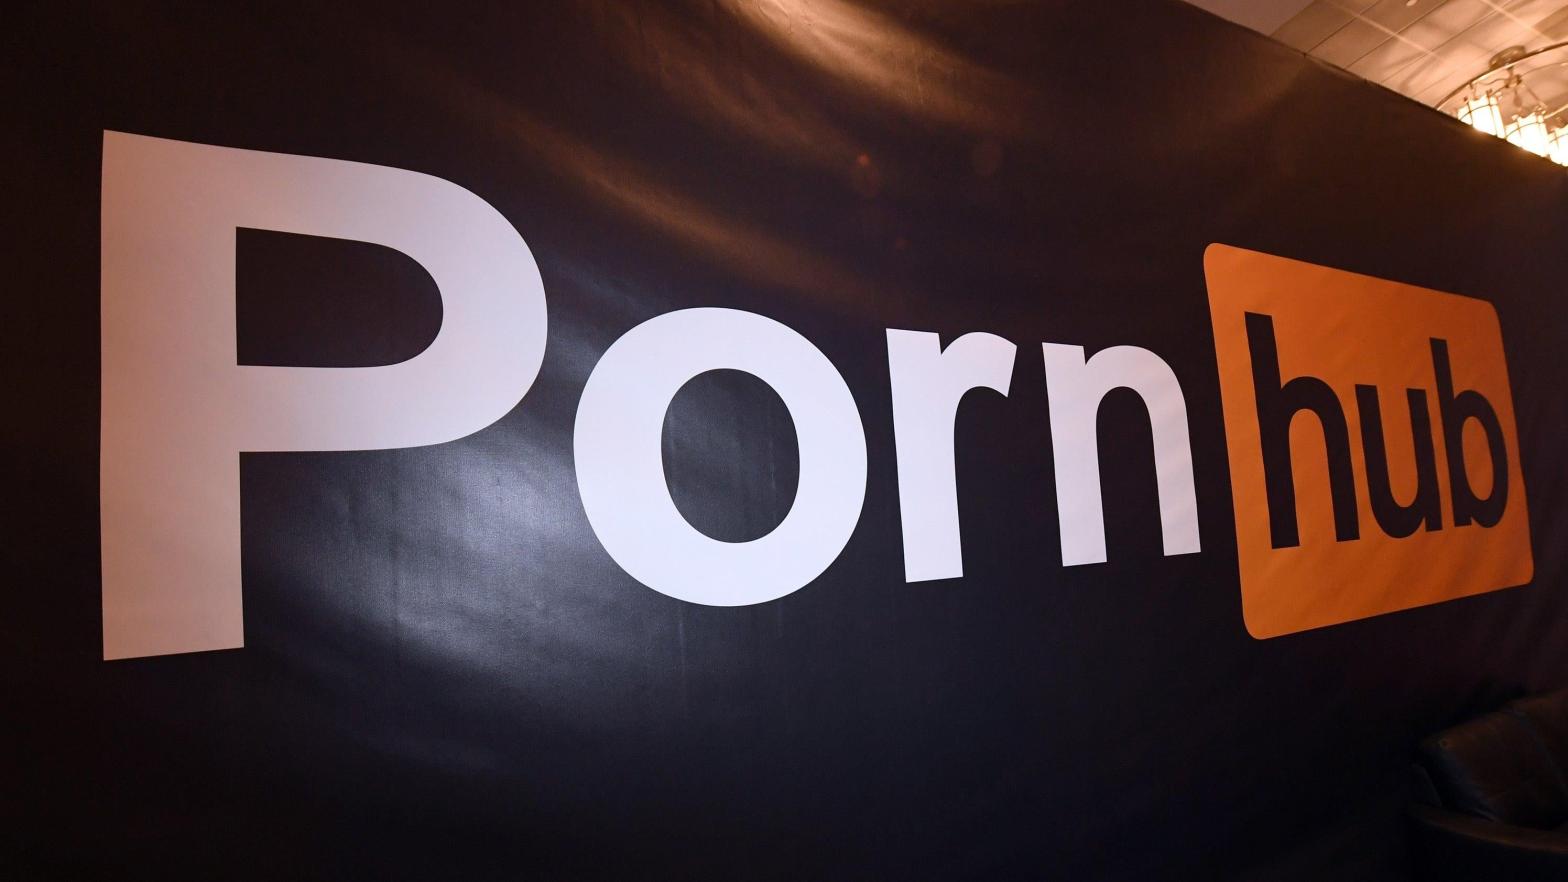 PornHub boasts 130 million visitors every day. (Image: Ethan Miller, Getty Images)